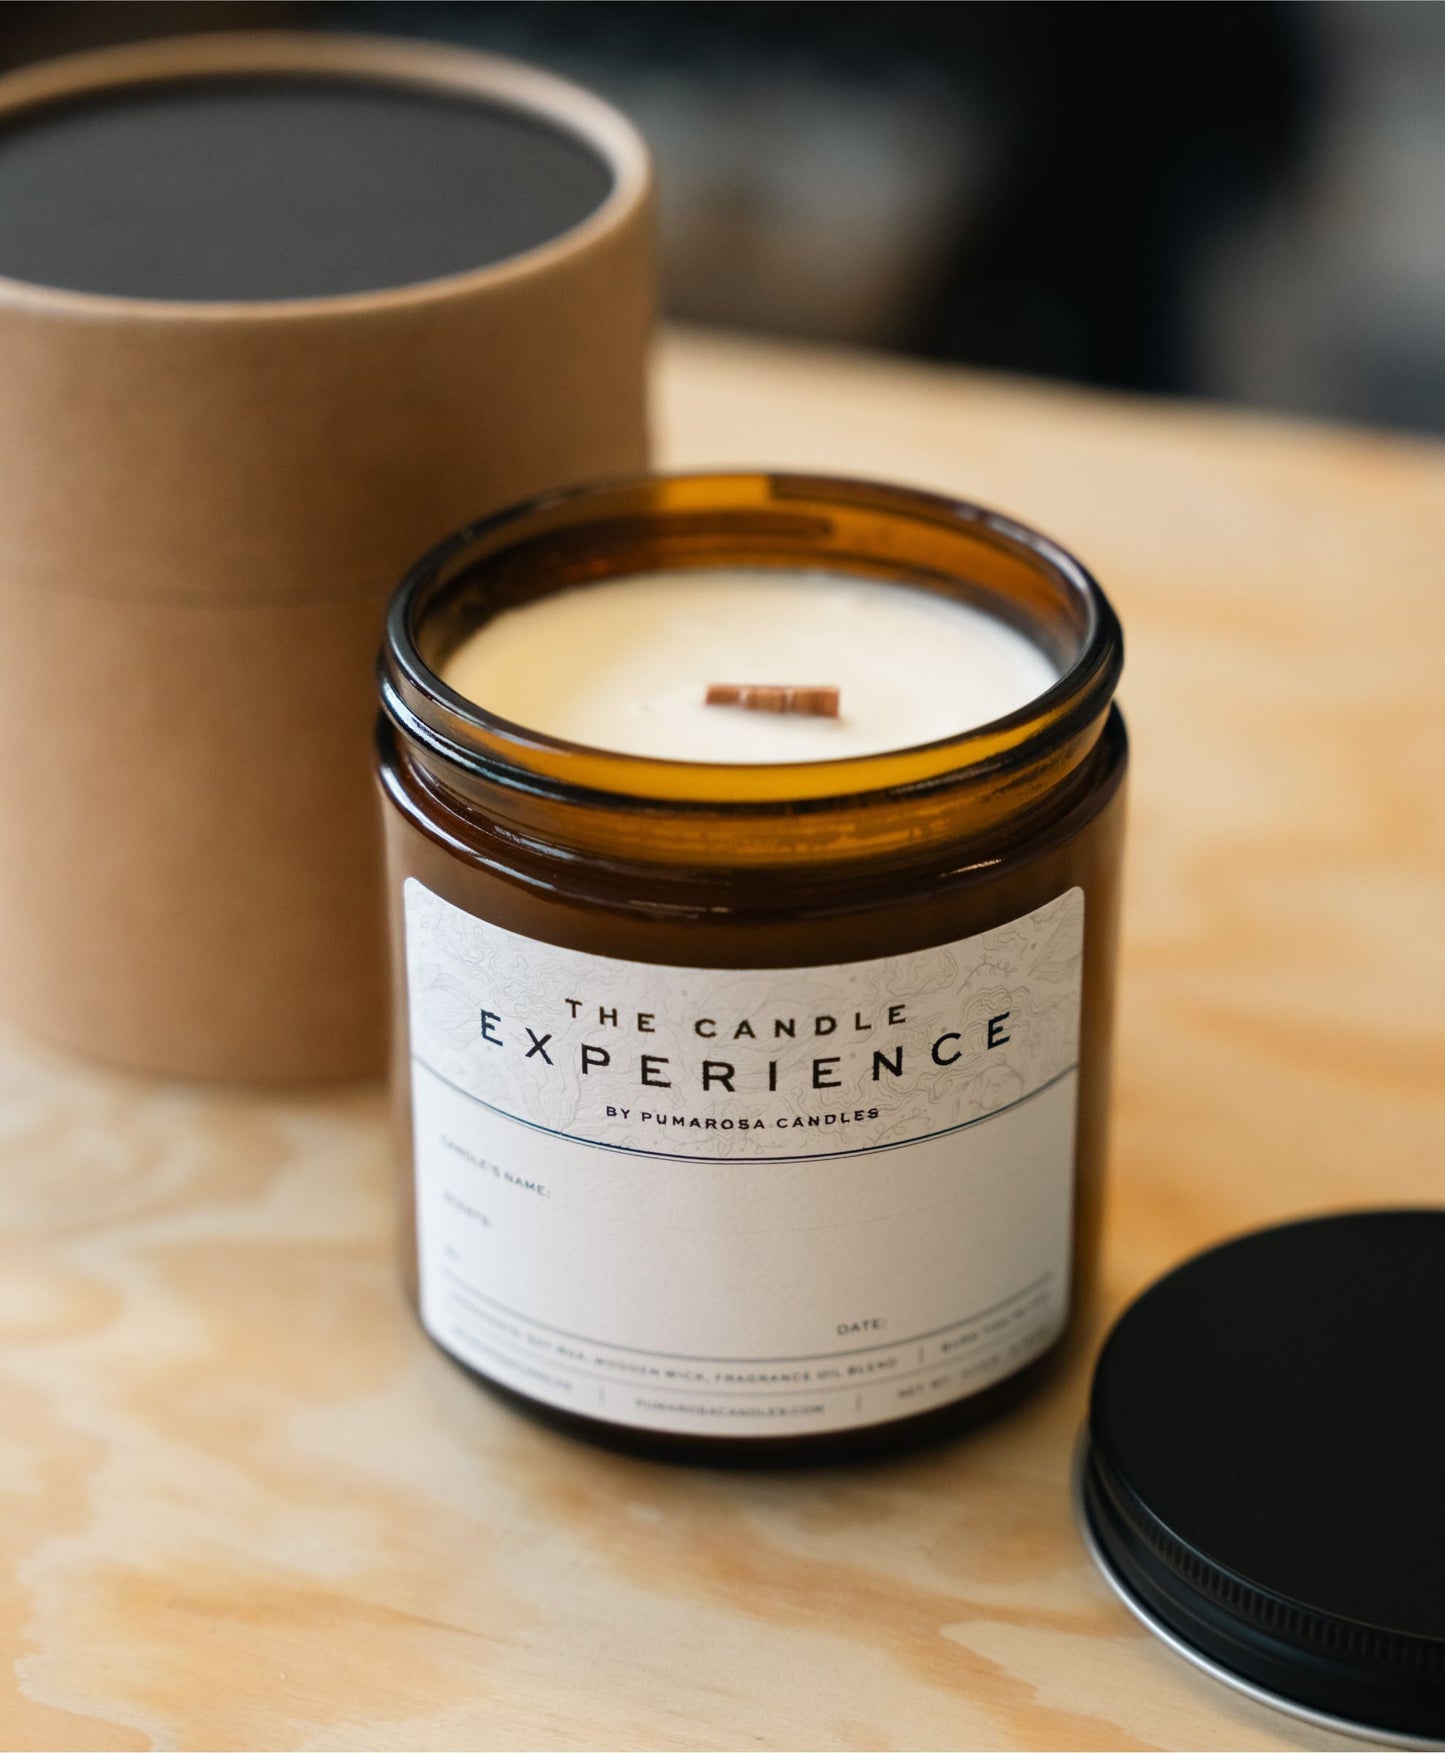 Candle-Making Experience: March, 30th at 3 pm